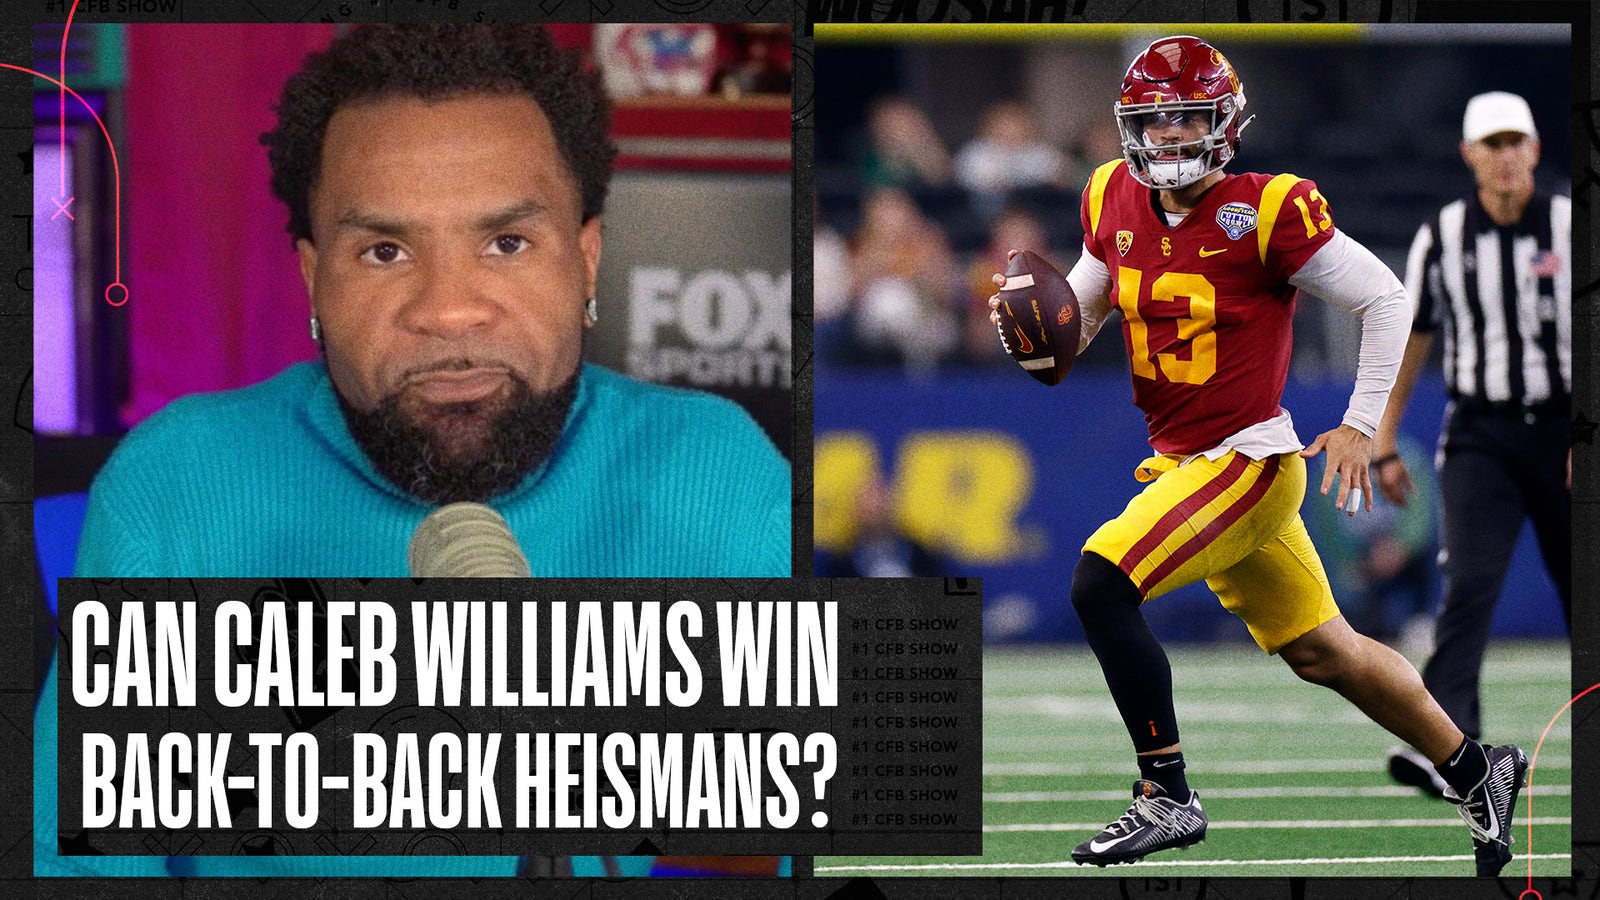 USC's Caleb Williams faces a stacked field in Heisman race